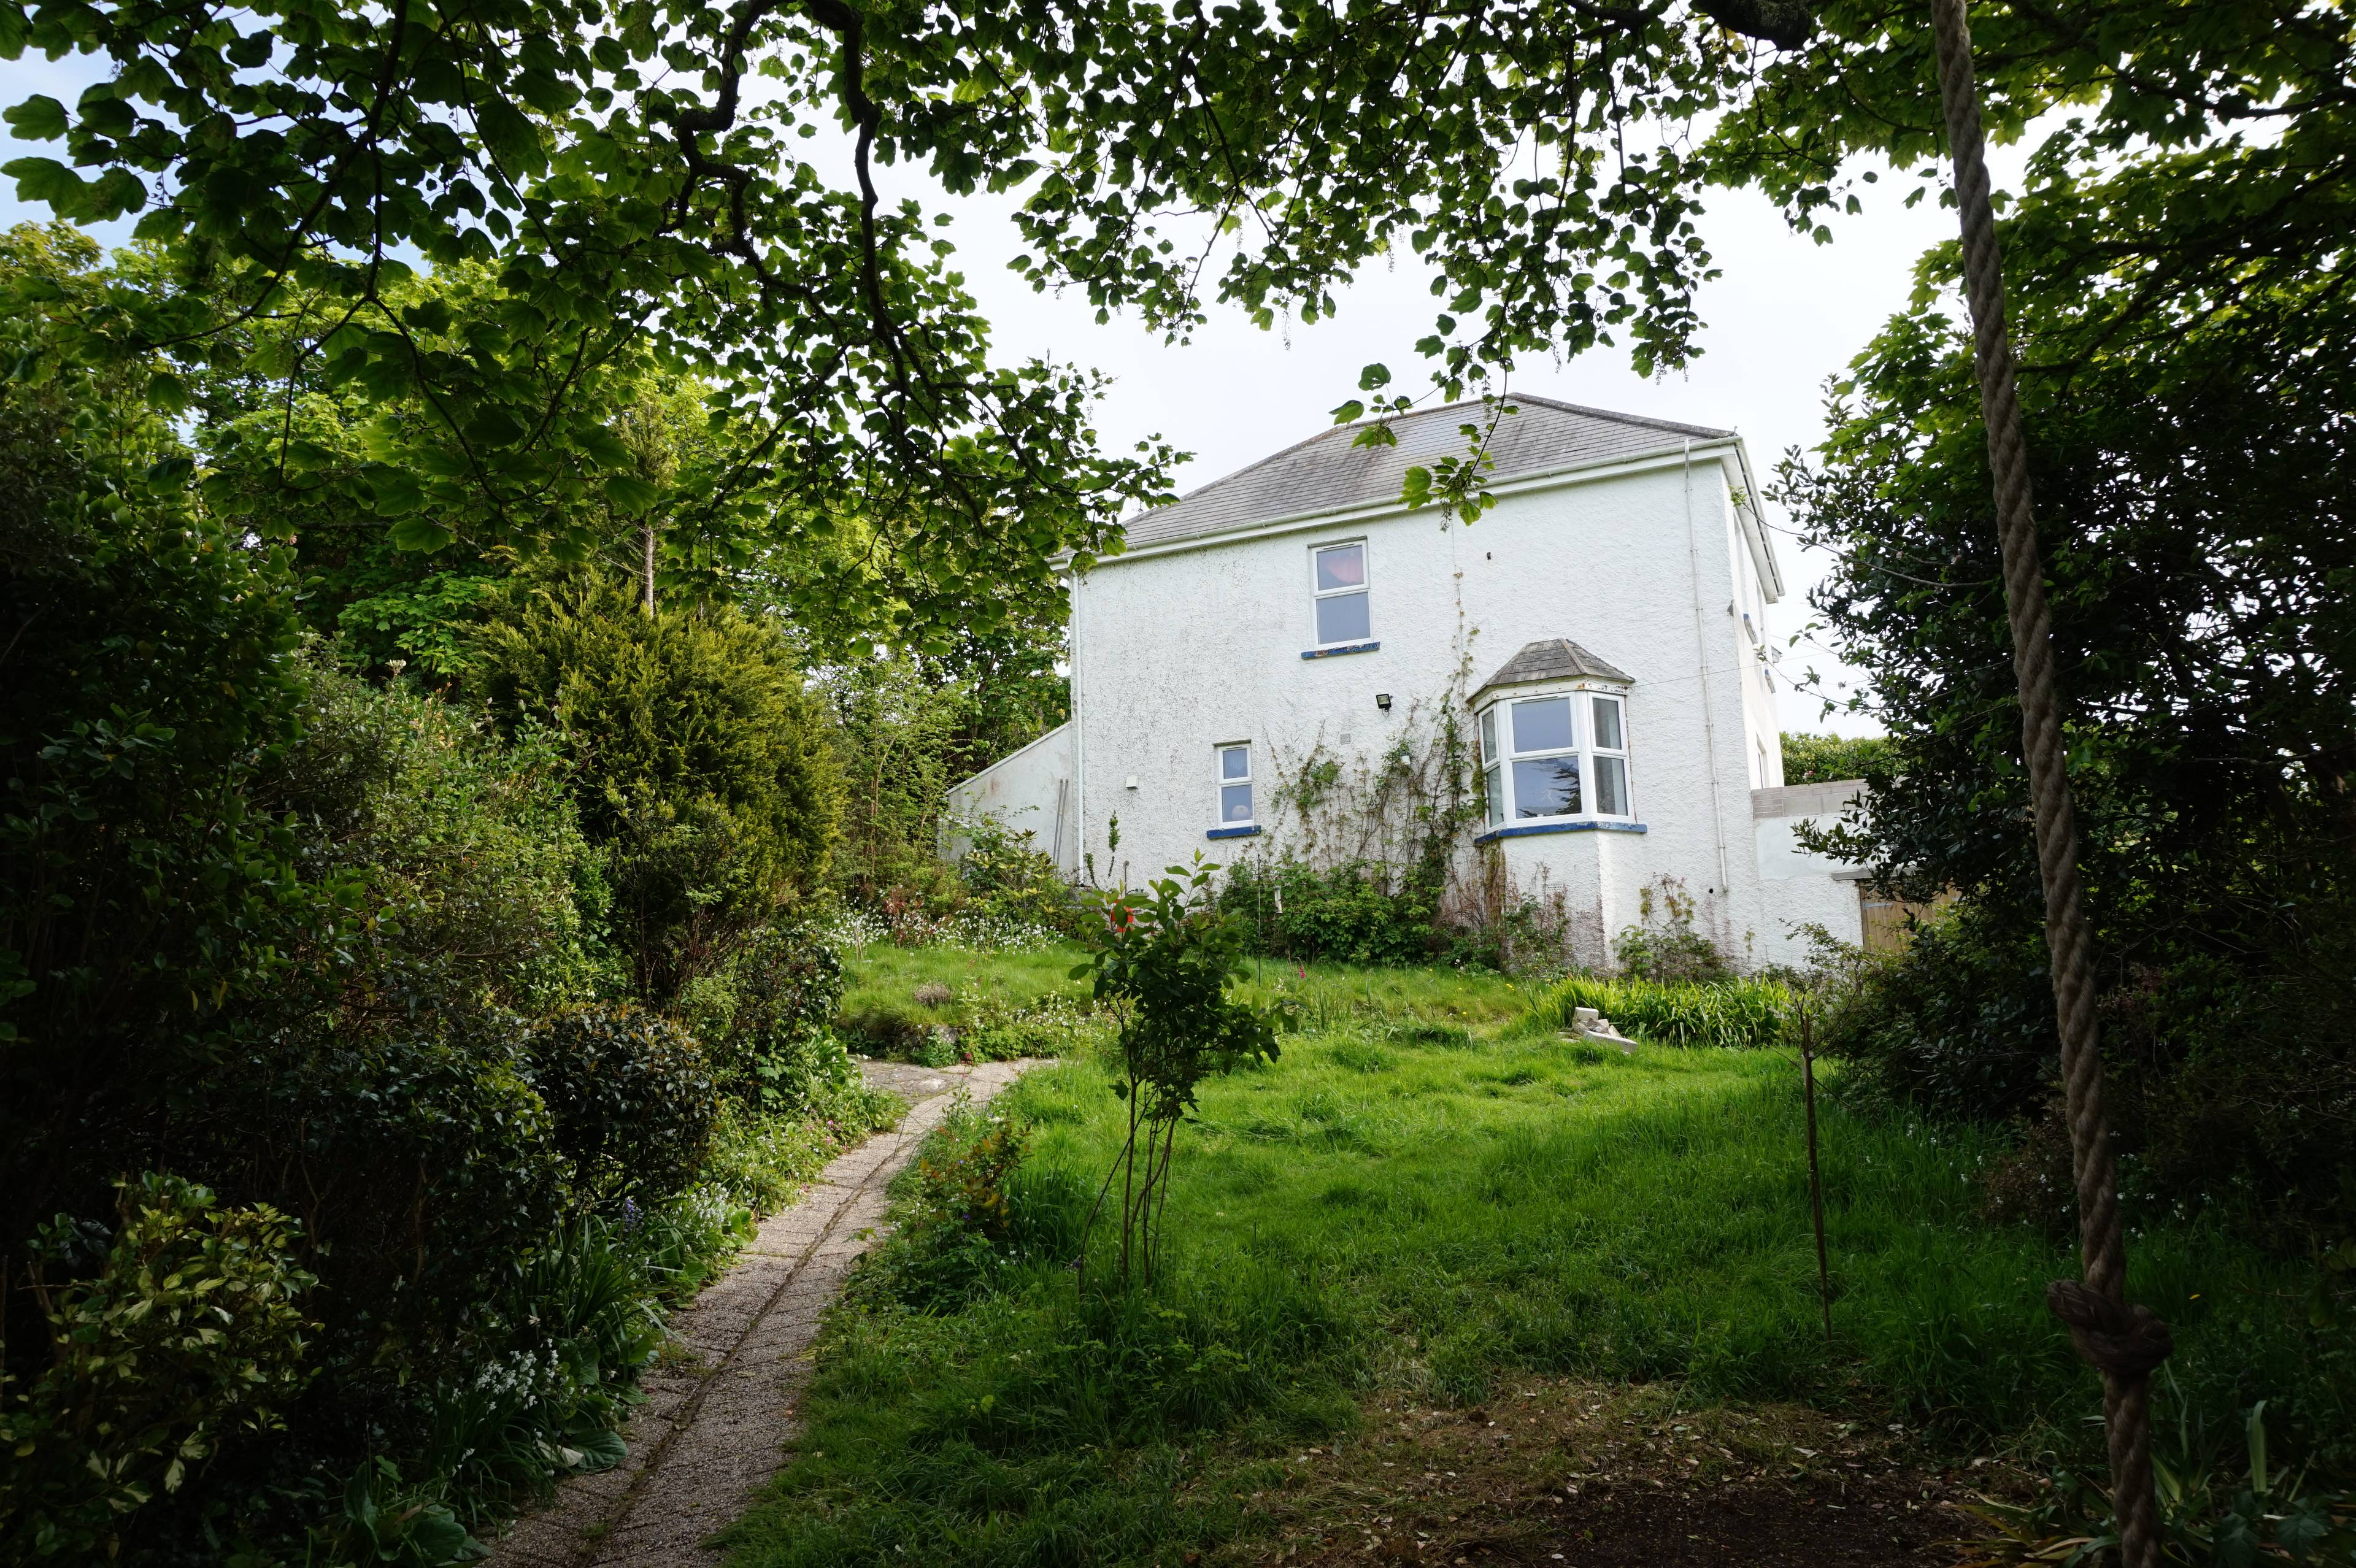 Detached 4 Bedroom Home in Mullion, The Lizard, Cornwall